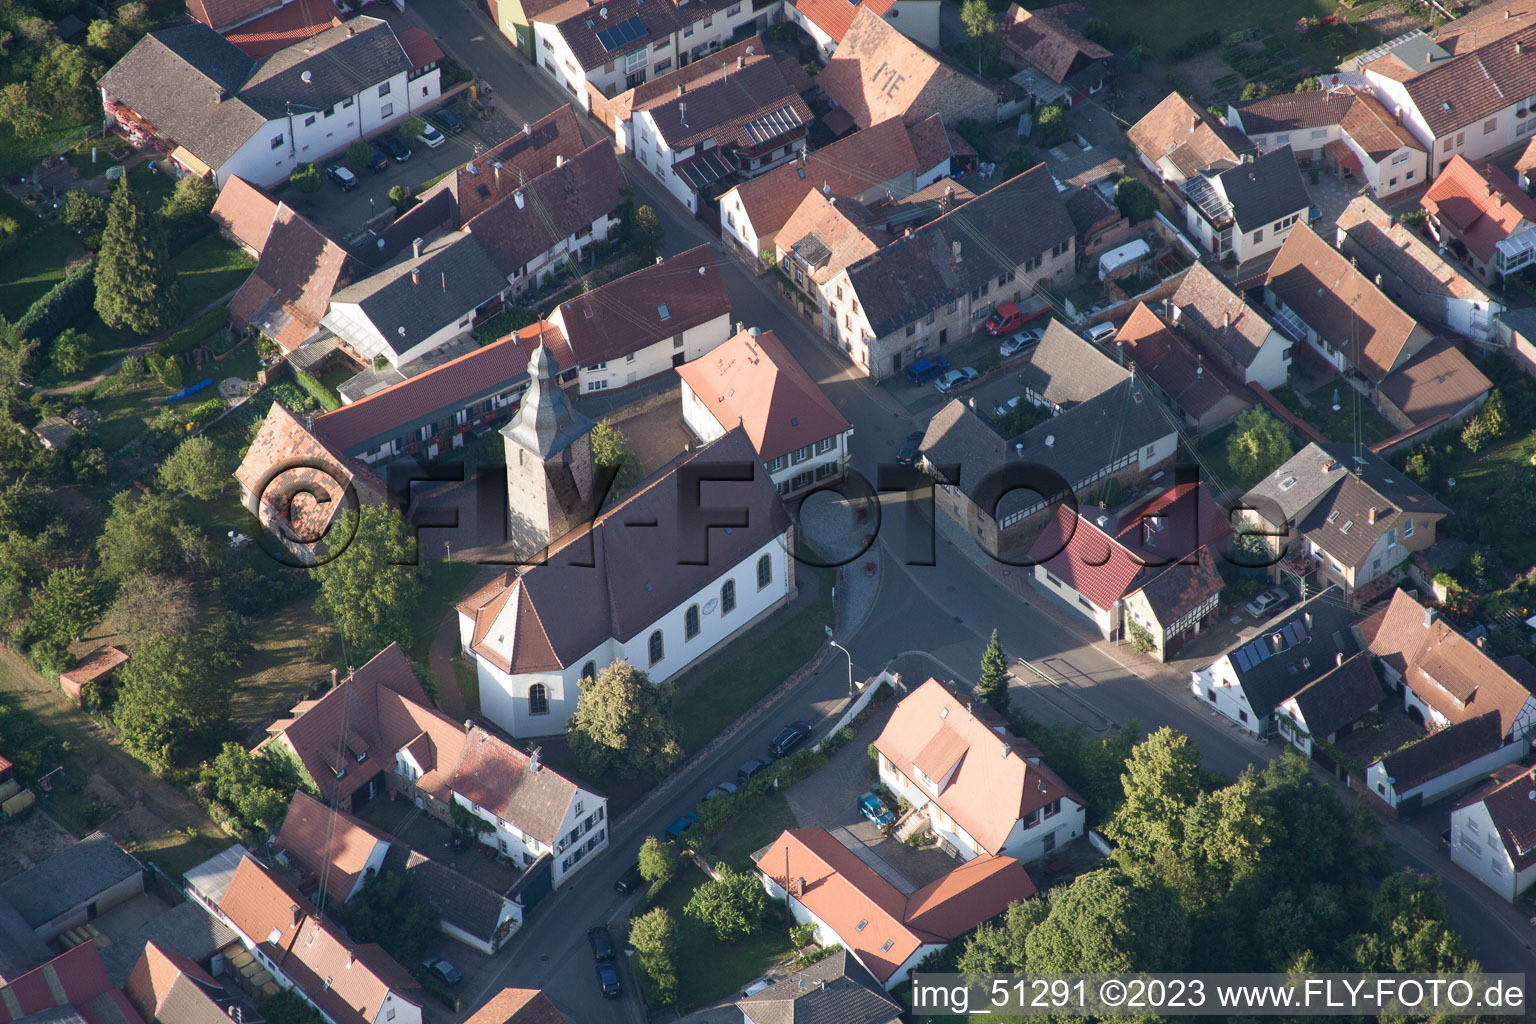 Aerial view of Church in the district Pleisweiler in Pleisweiler-Oberhofen in the state Rhineland-Palatinate, Germany